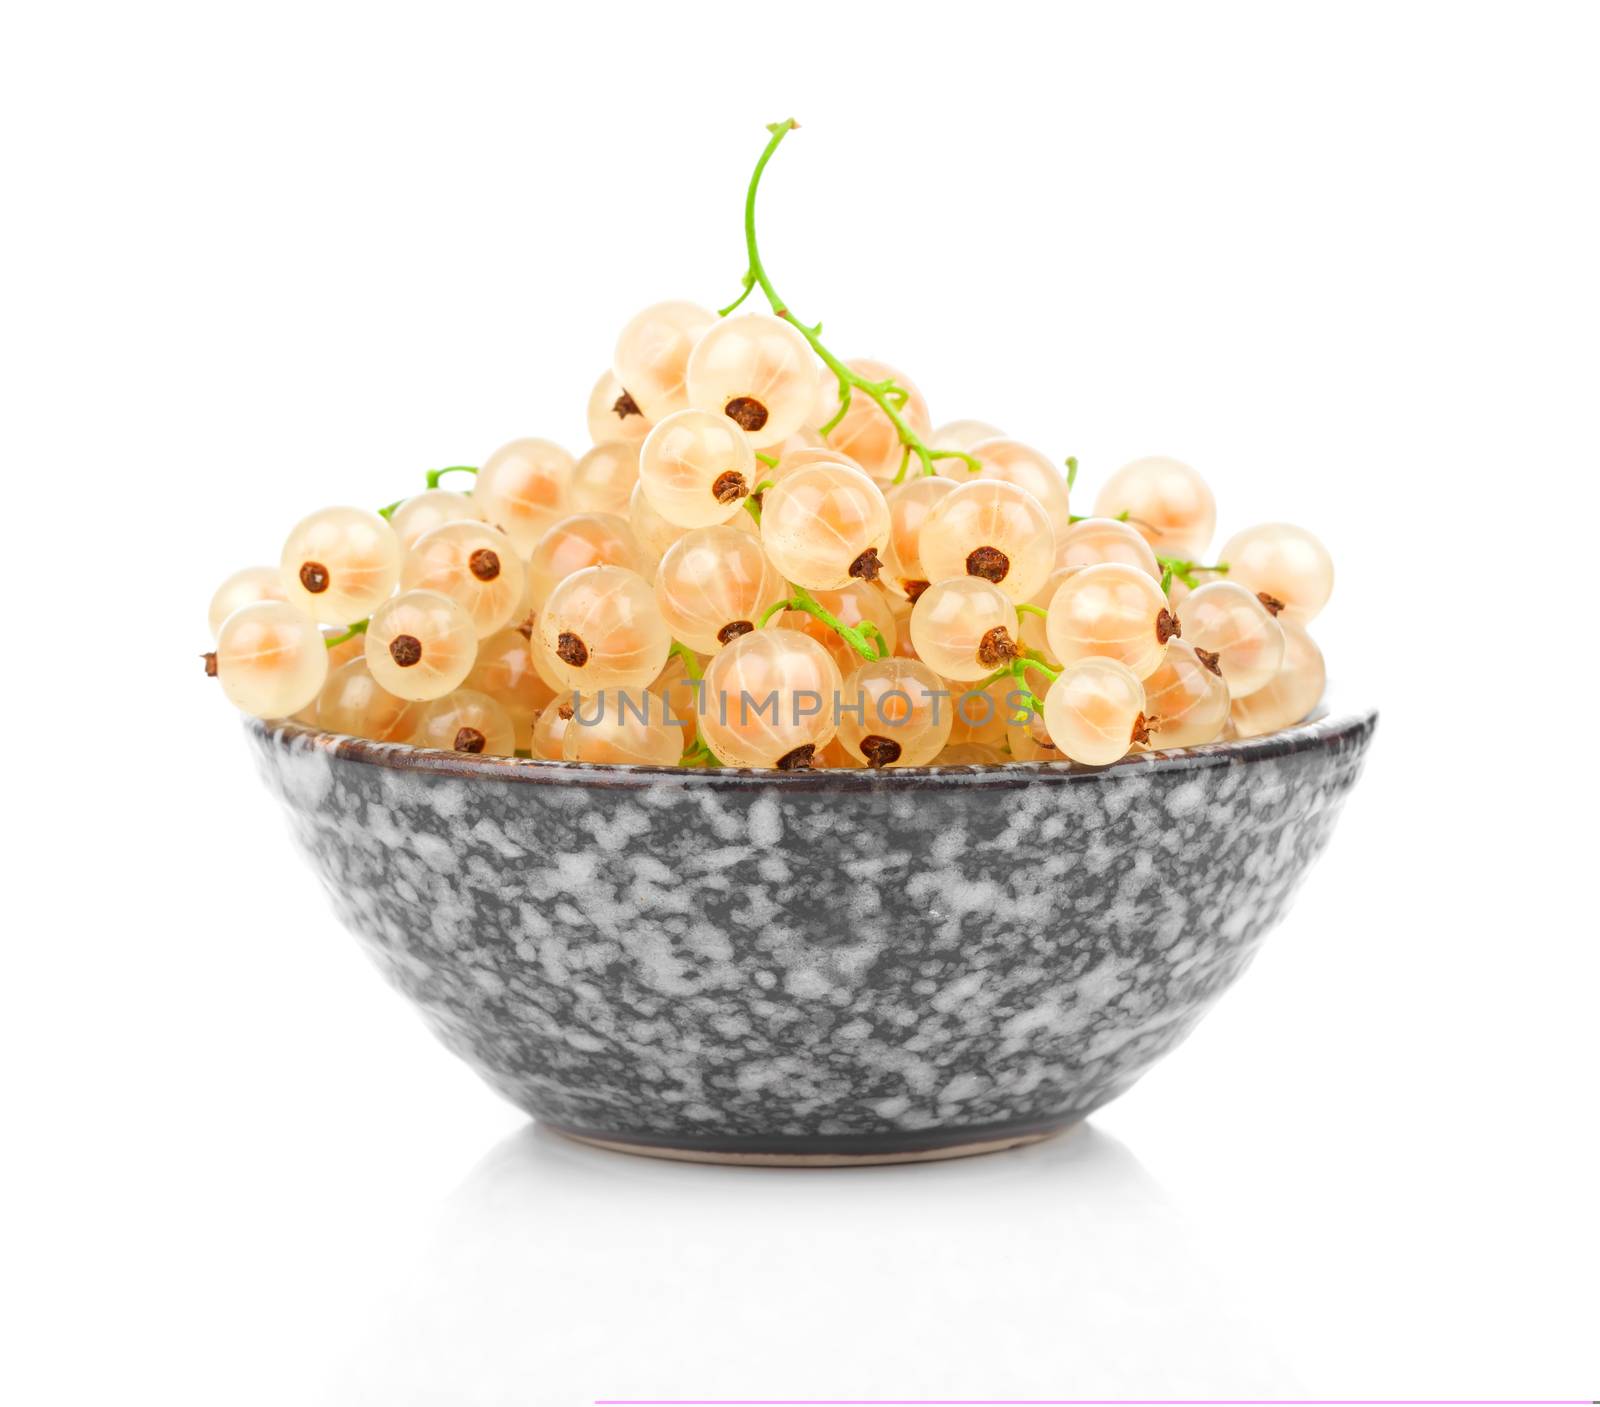 white currant in a bowl, on a white background
 by motorolka